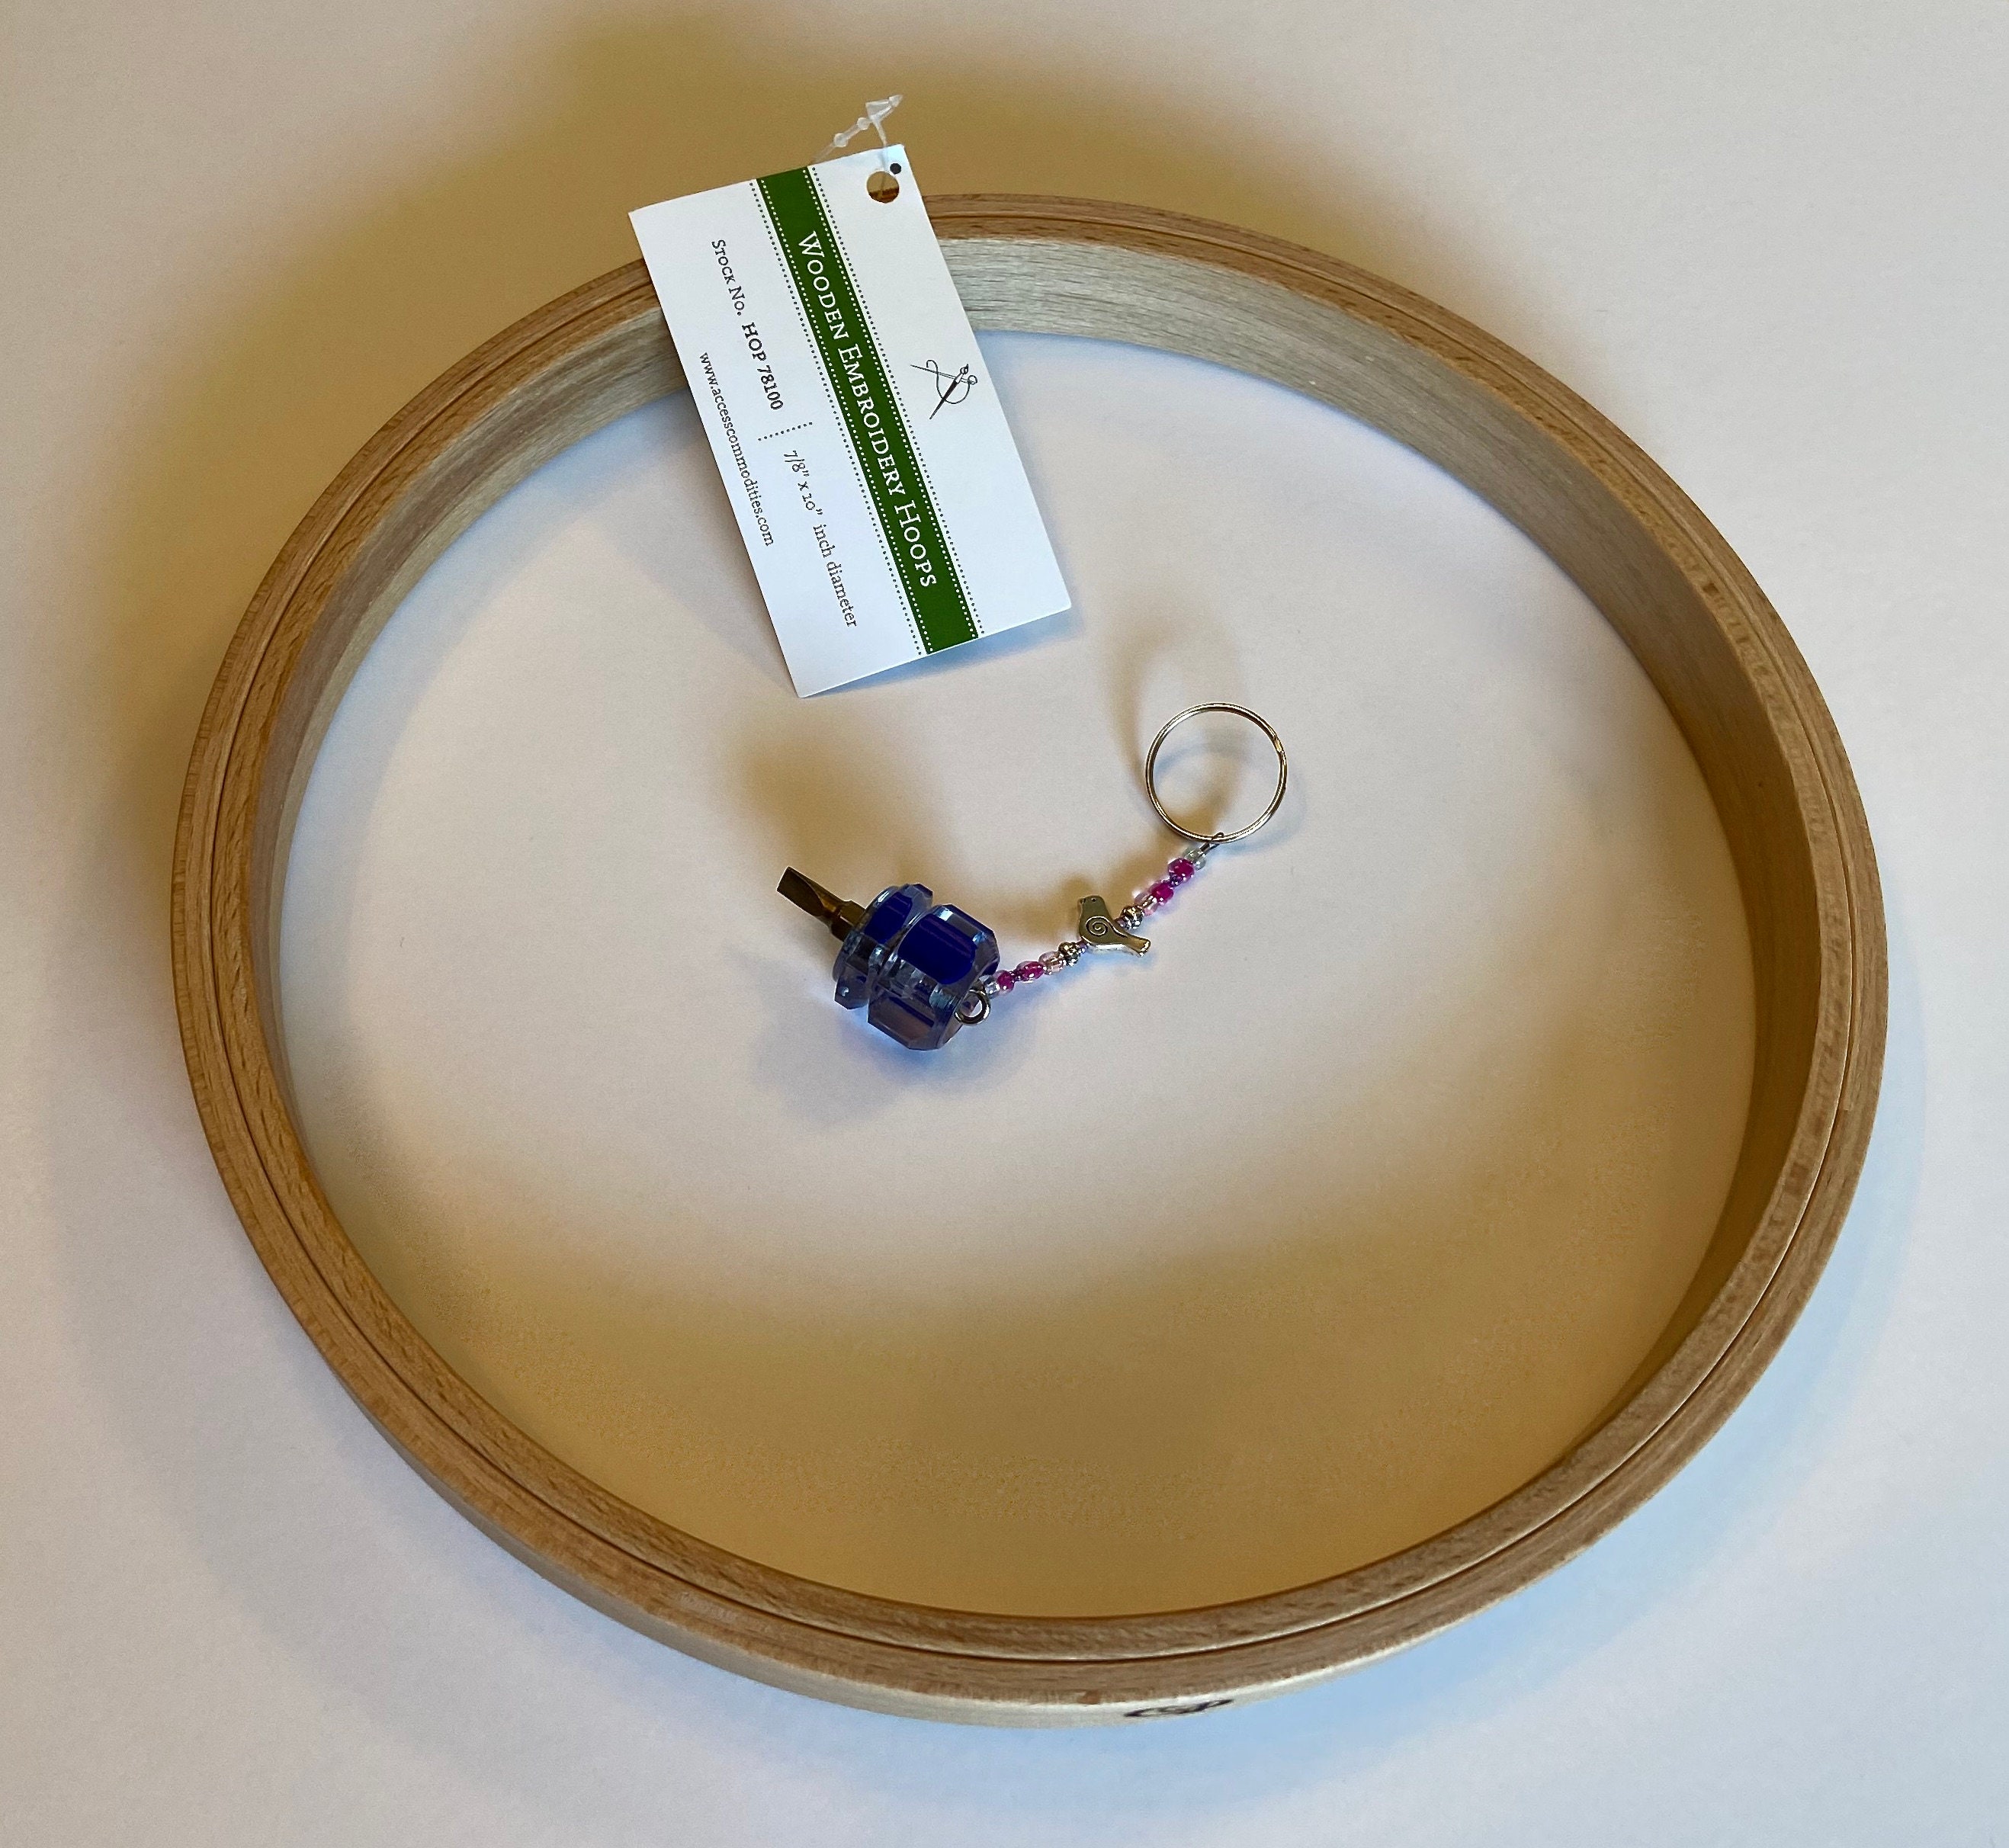 Medium Blue Embroidery Hoop Frame. Blue 'susanna' Liberty Arts Fabric.  Embroidery Hoop Art. Size 6 9 Inch Embroidery Hoops 